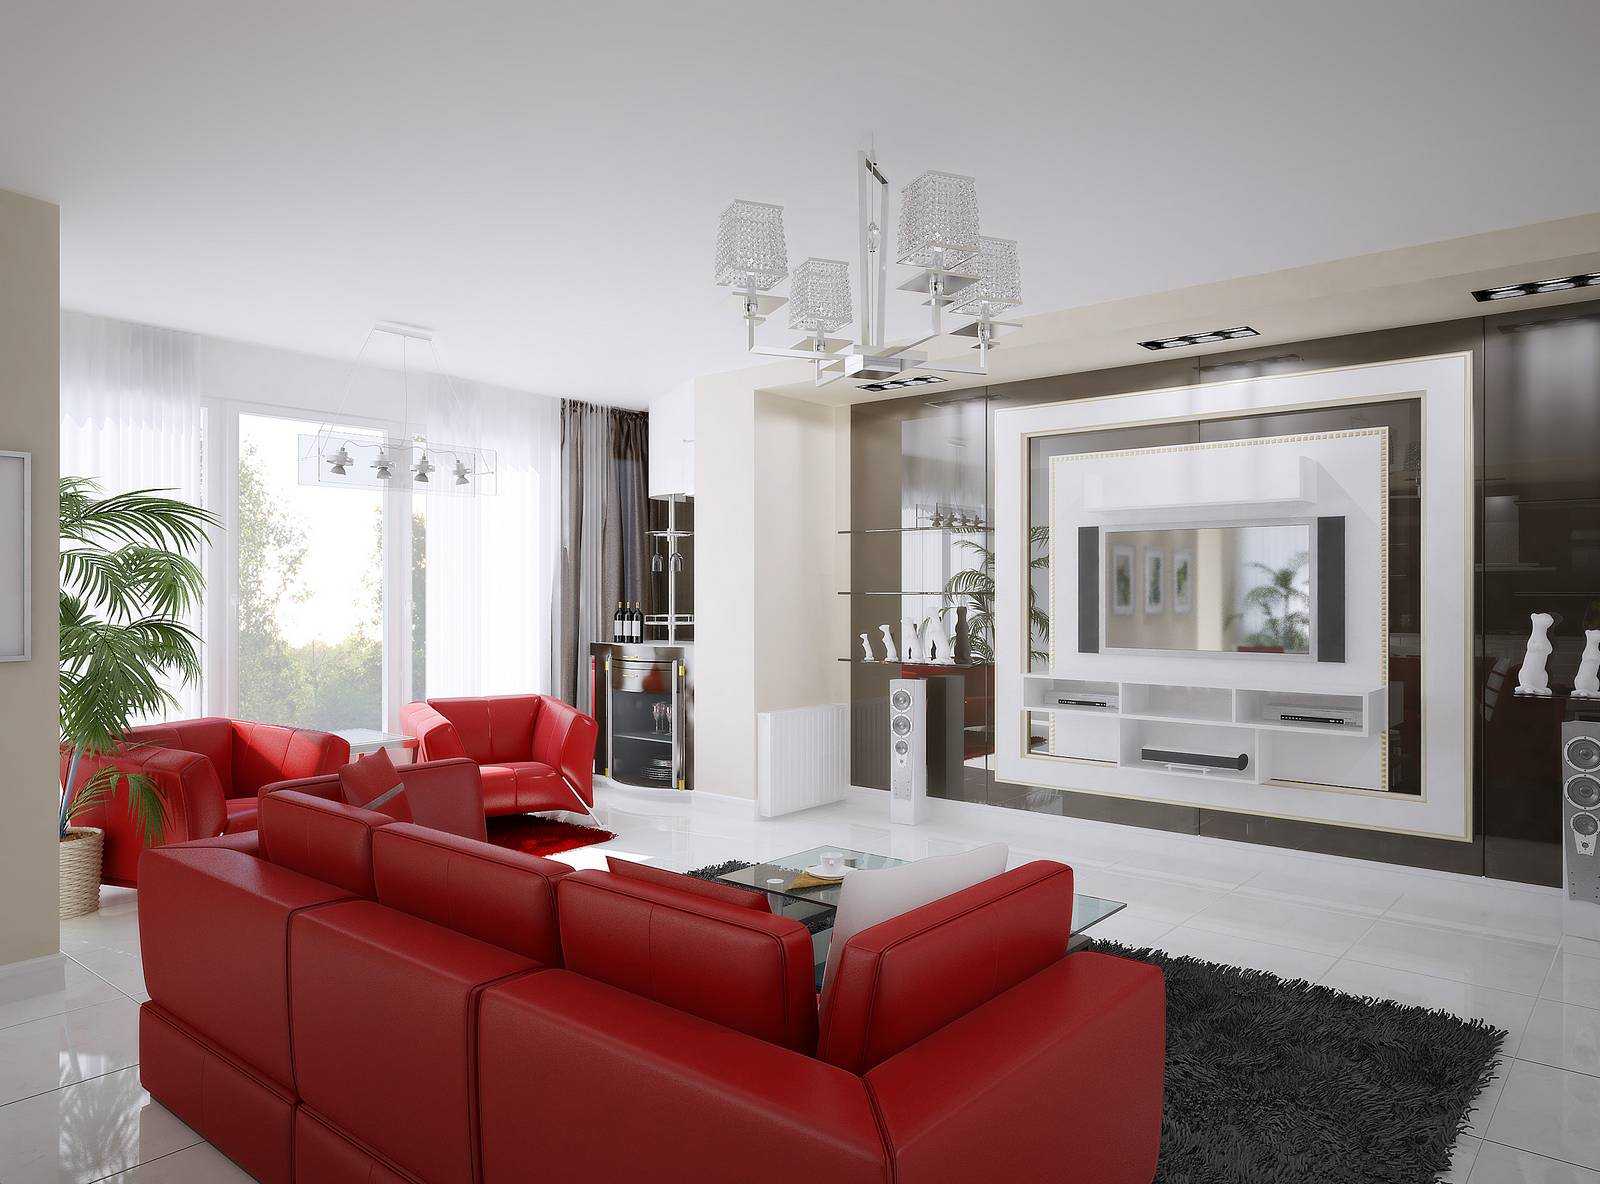 combination of red with other colors in the interior of the house